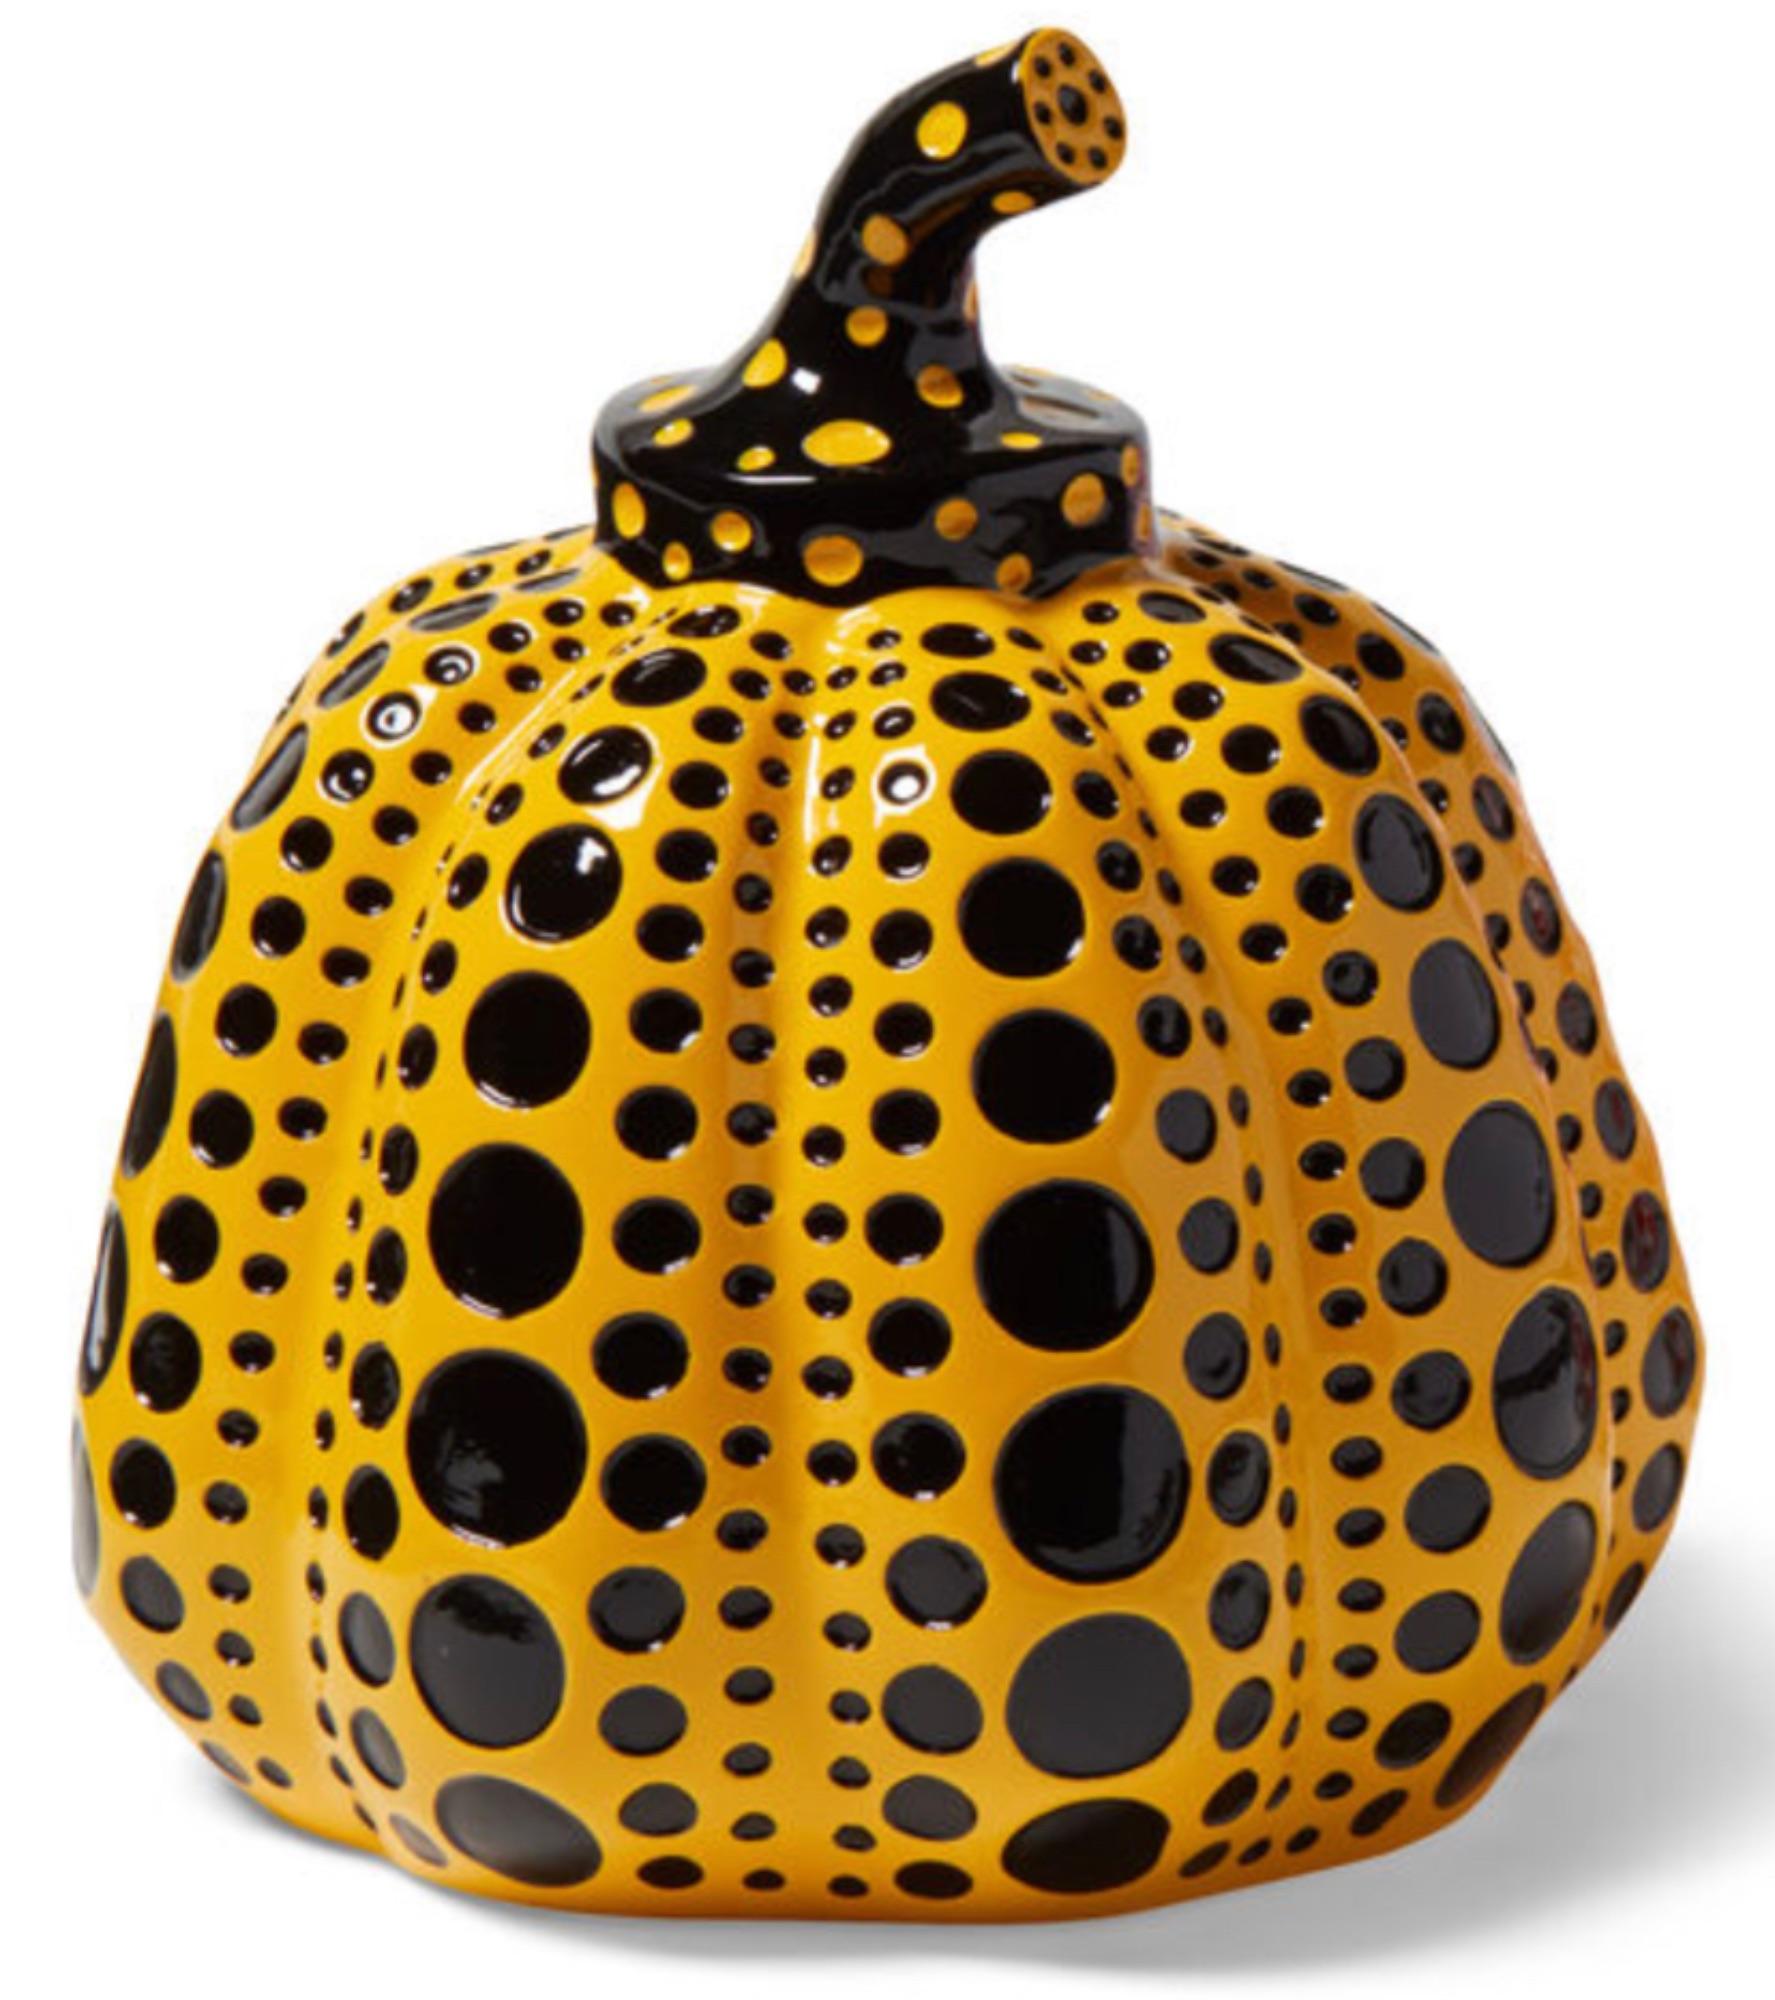 Red & Yellow Pumpkin (two sculptures) - Sculpture by Yayoi Kusama